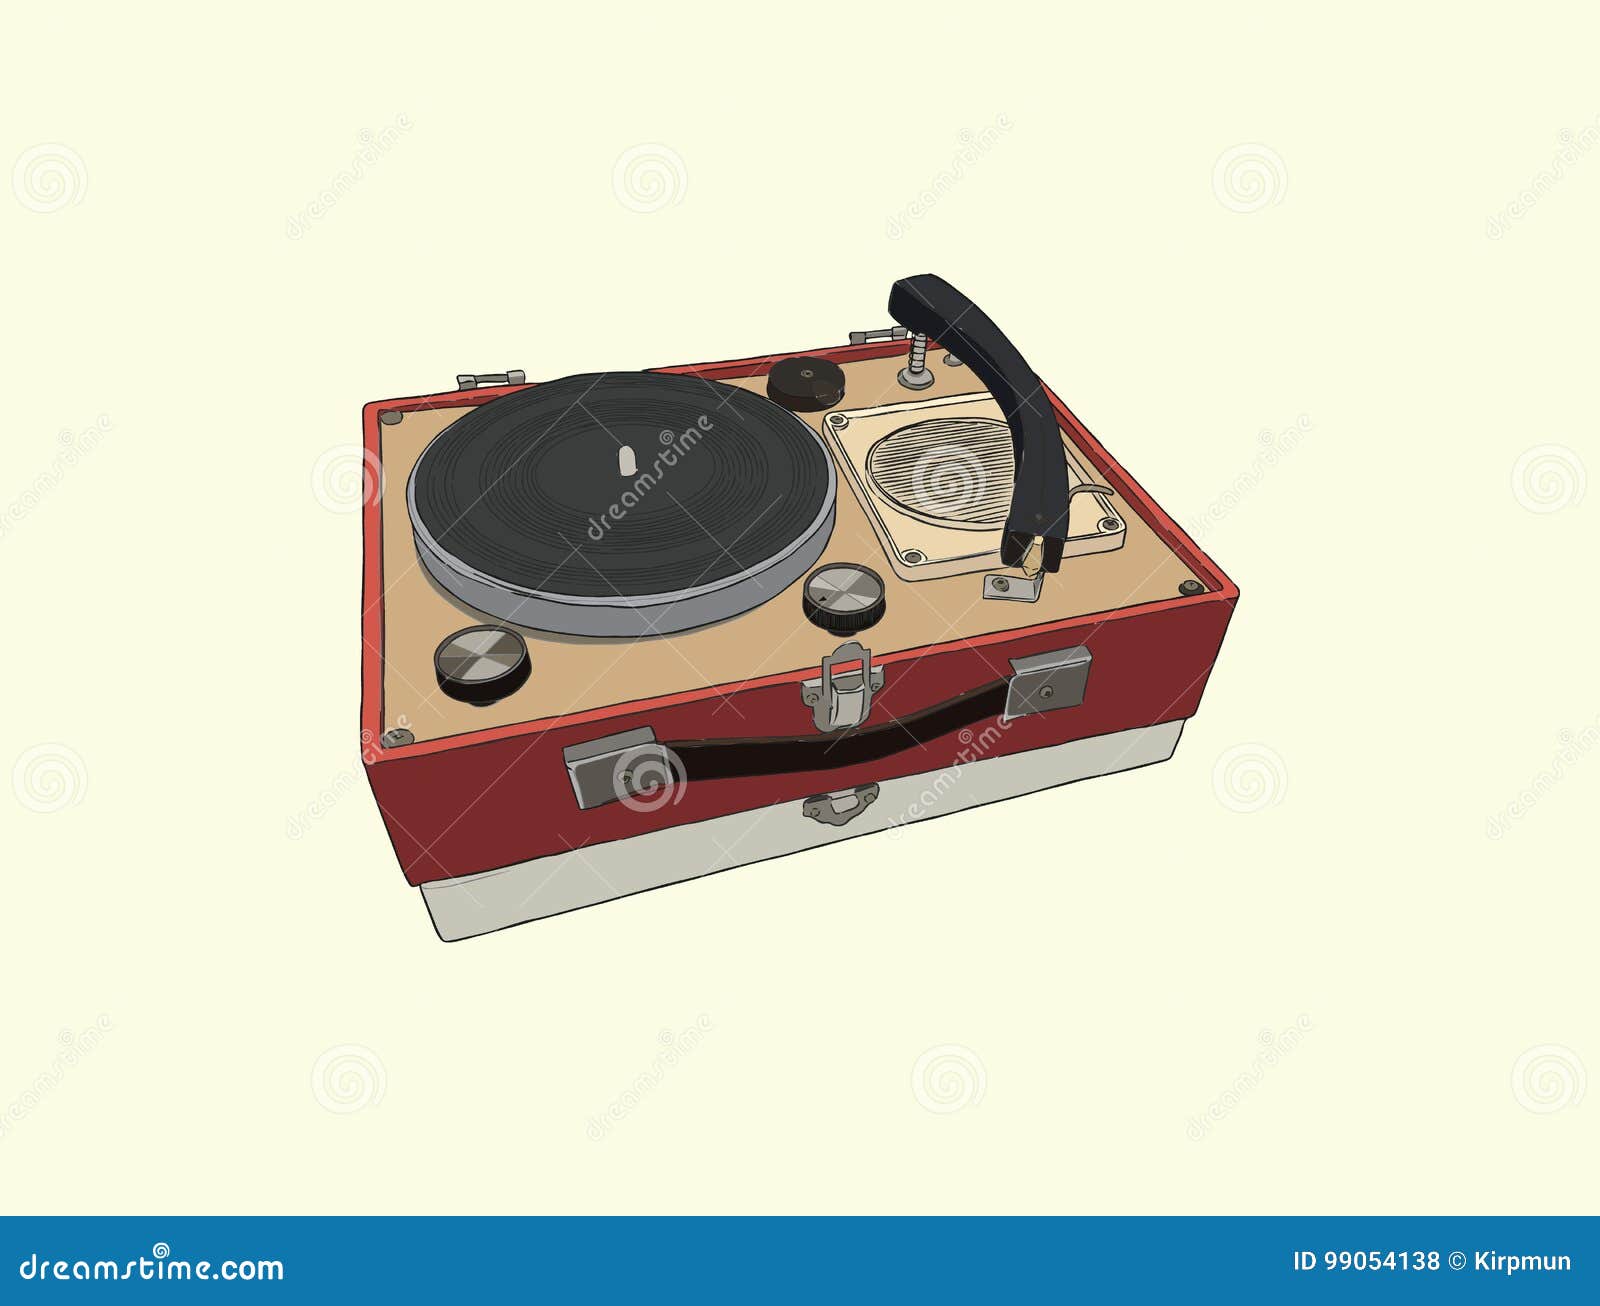 Vintage Turntable. Record Player Vinyl Record. Sketch Vector. Stock